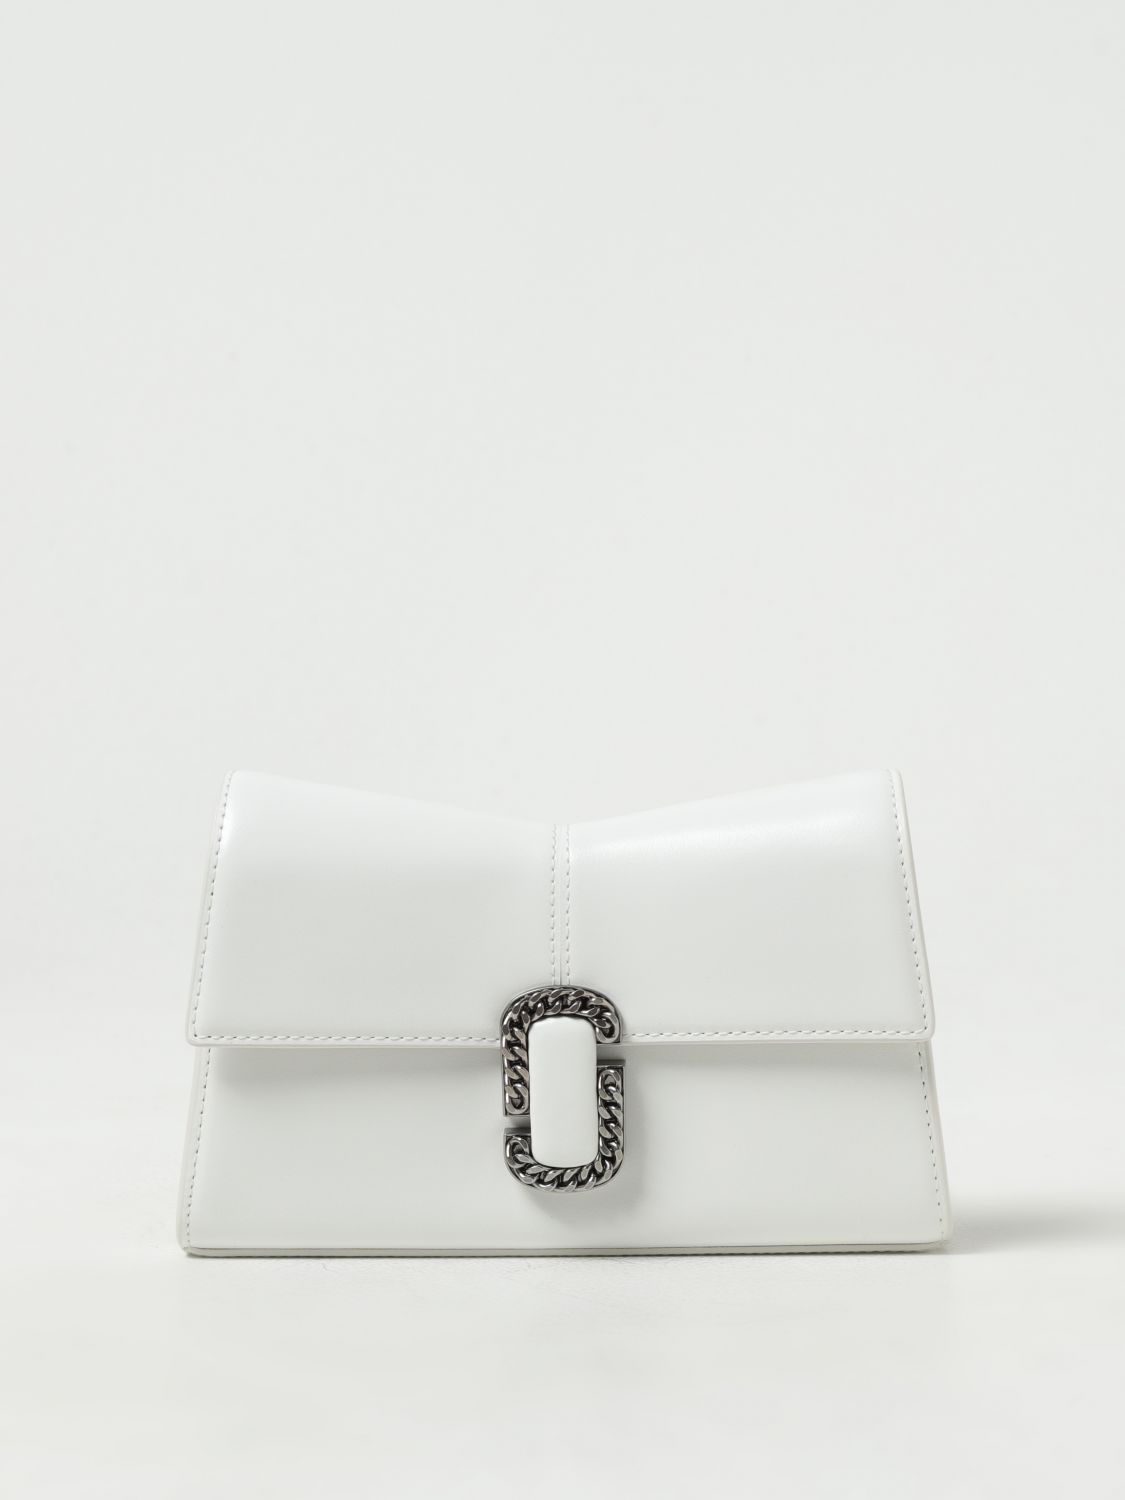 MARC JACOBS THE ST. MARC BAG CLUTCH IN COATED LEATHER,F09945001